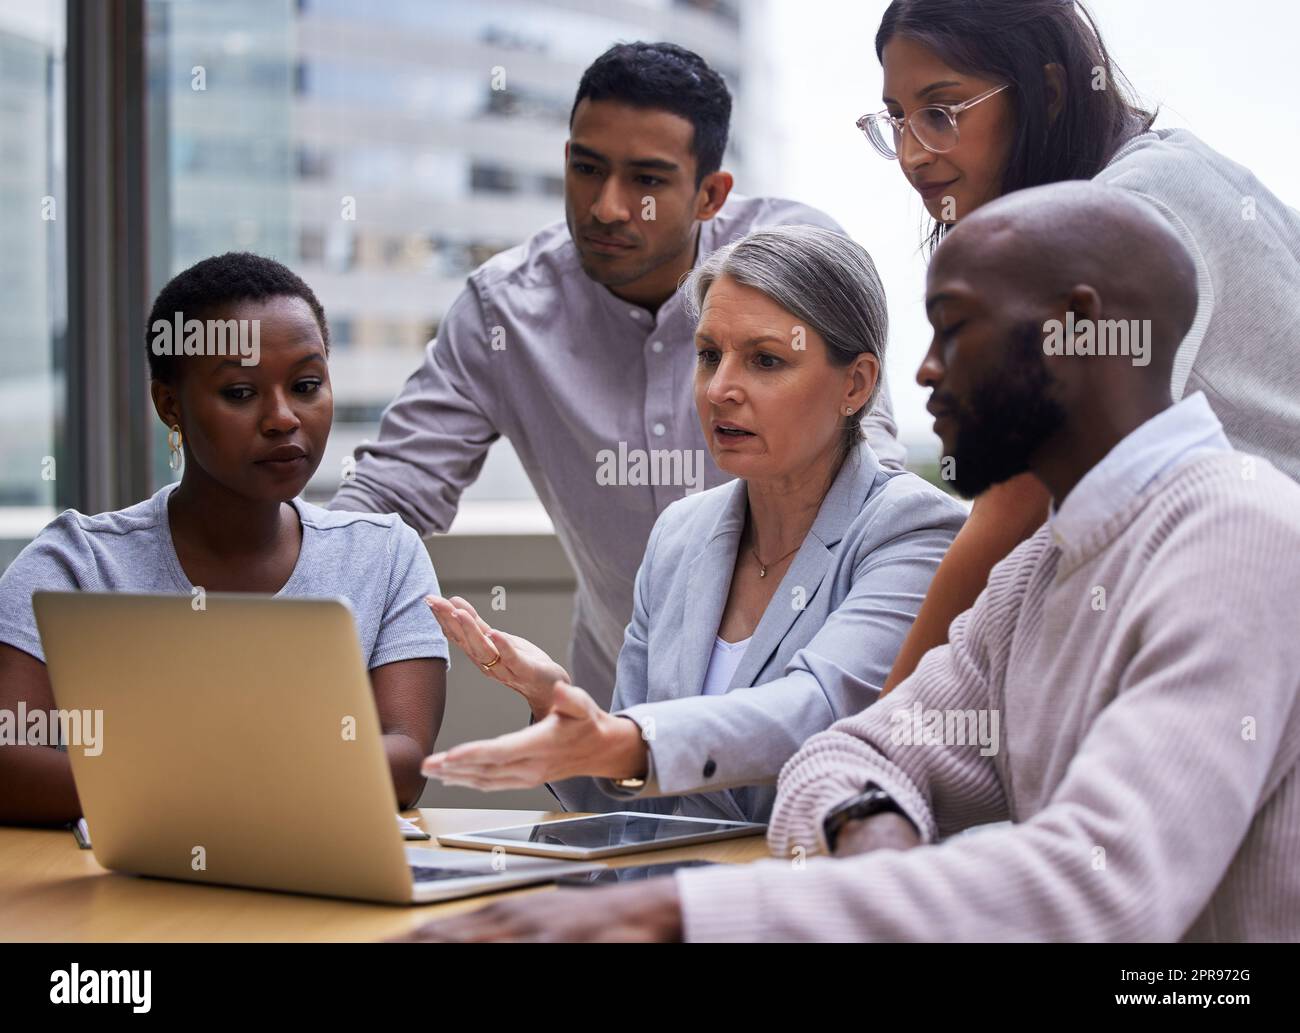 Chase the vision, not the money. a group of professional coworkers using a laptop together at work. Stock Photo